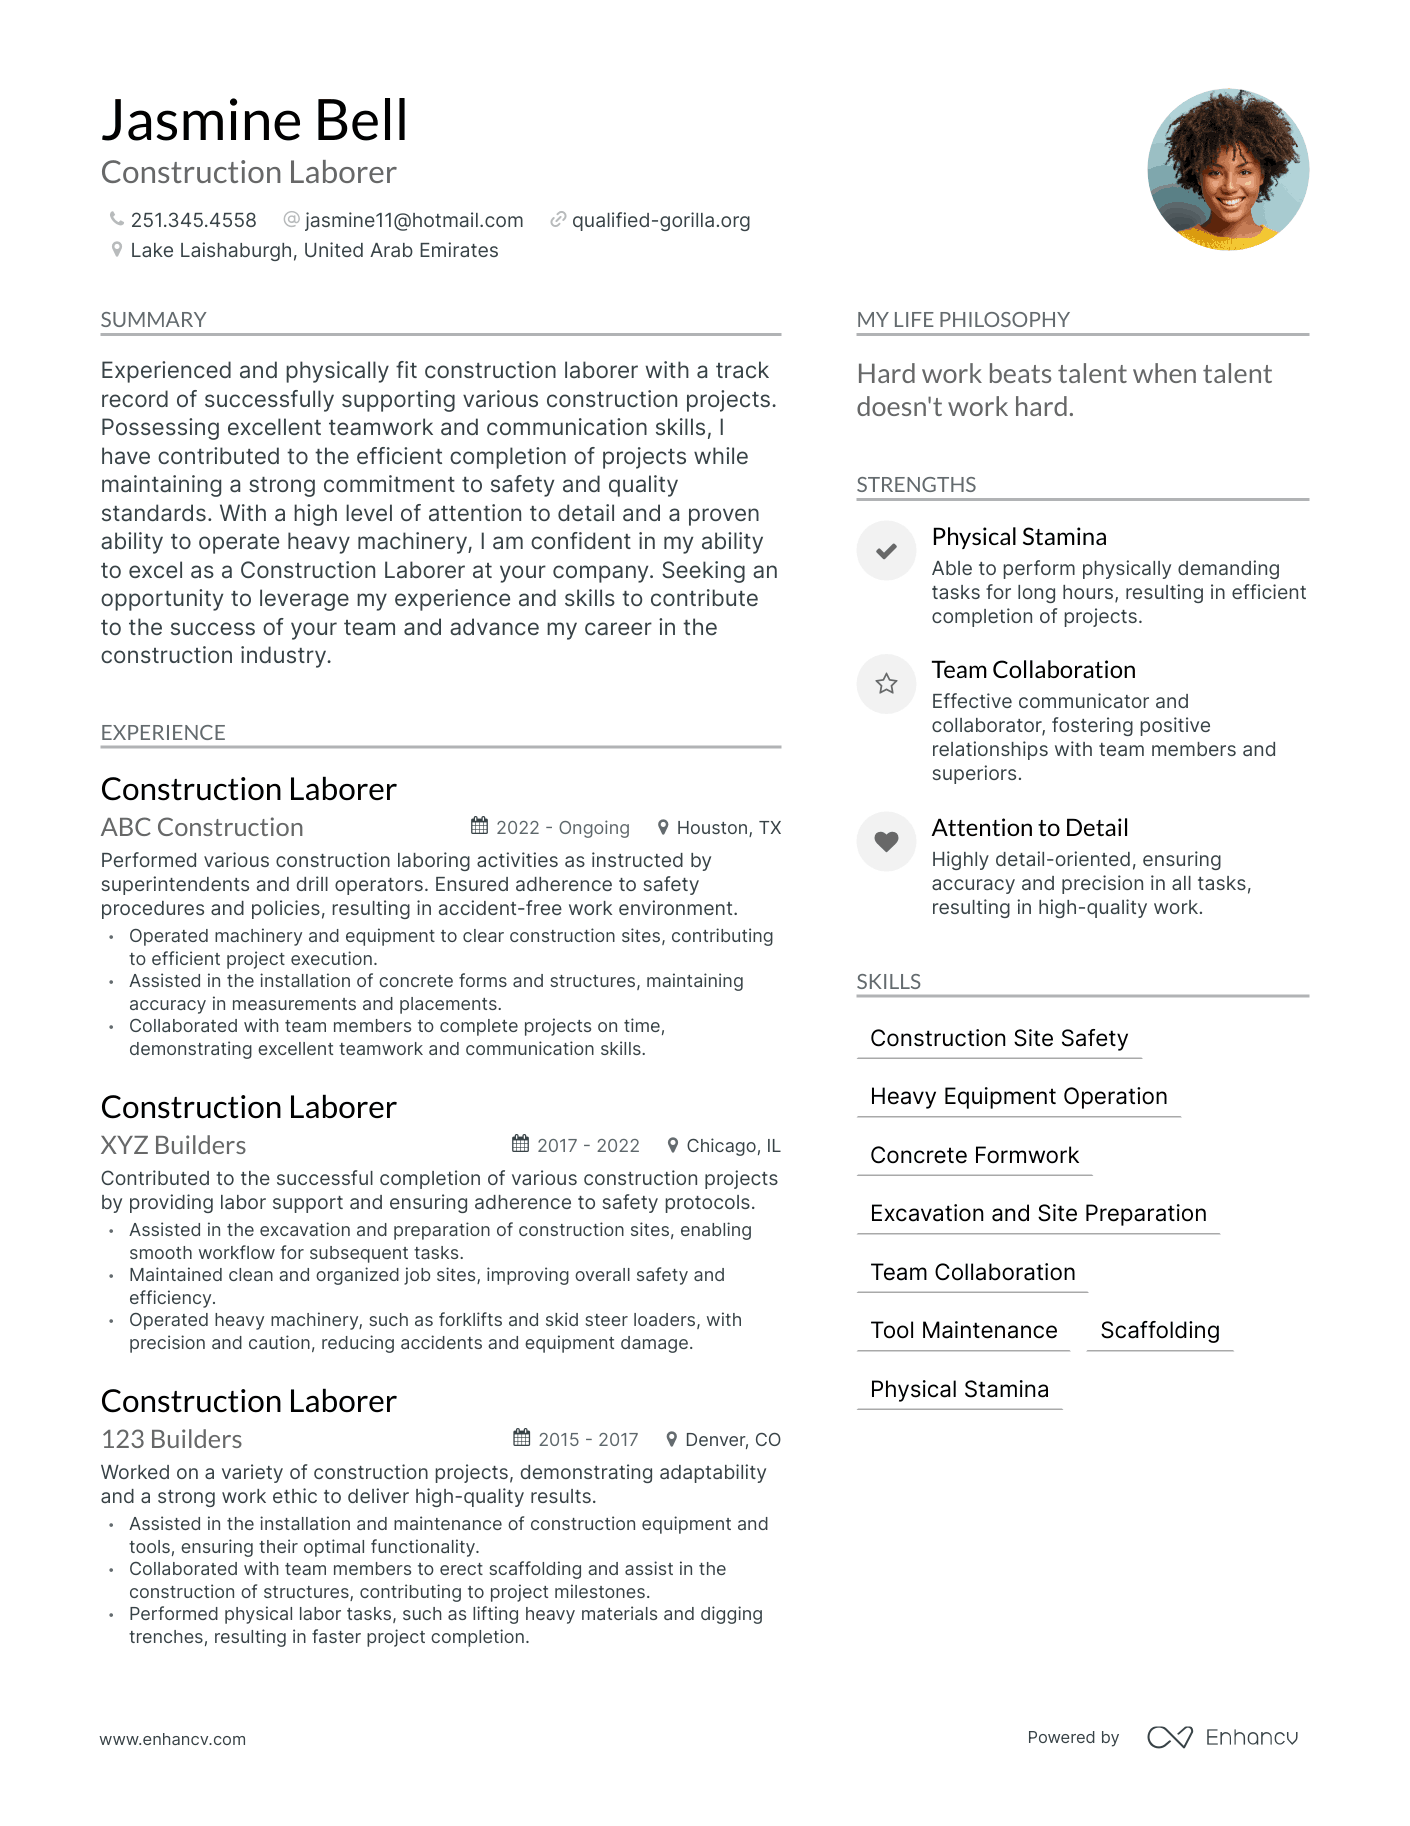 Construction Laborer resume example